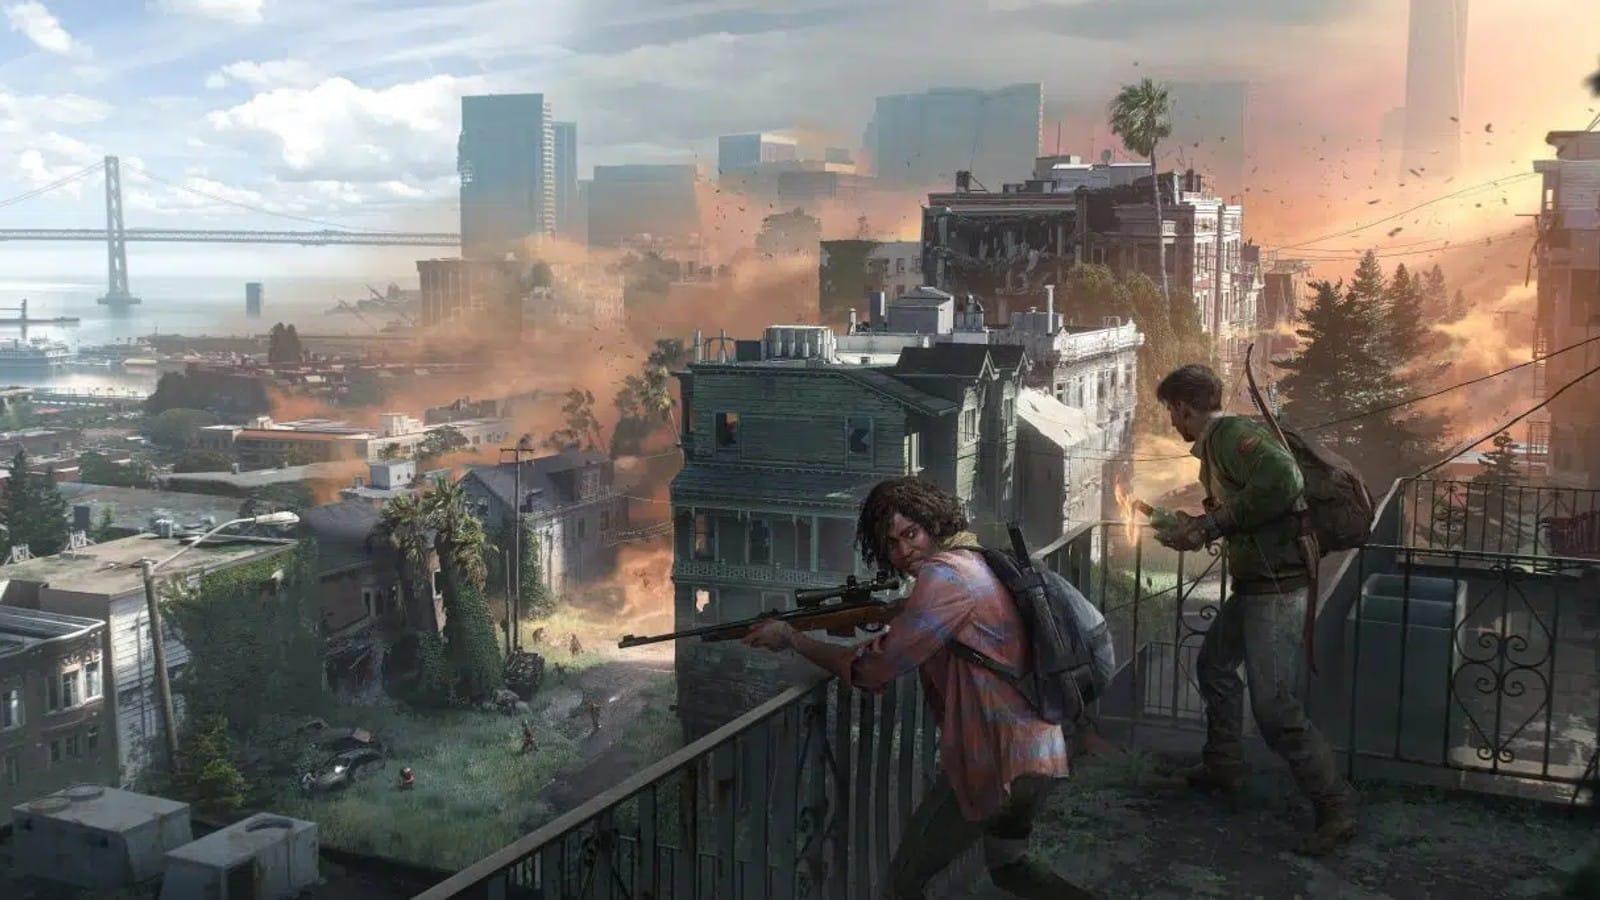 Official concept art for the upcoming The Last of Us multiplayer factions project by Naughty Dog